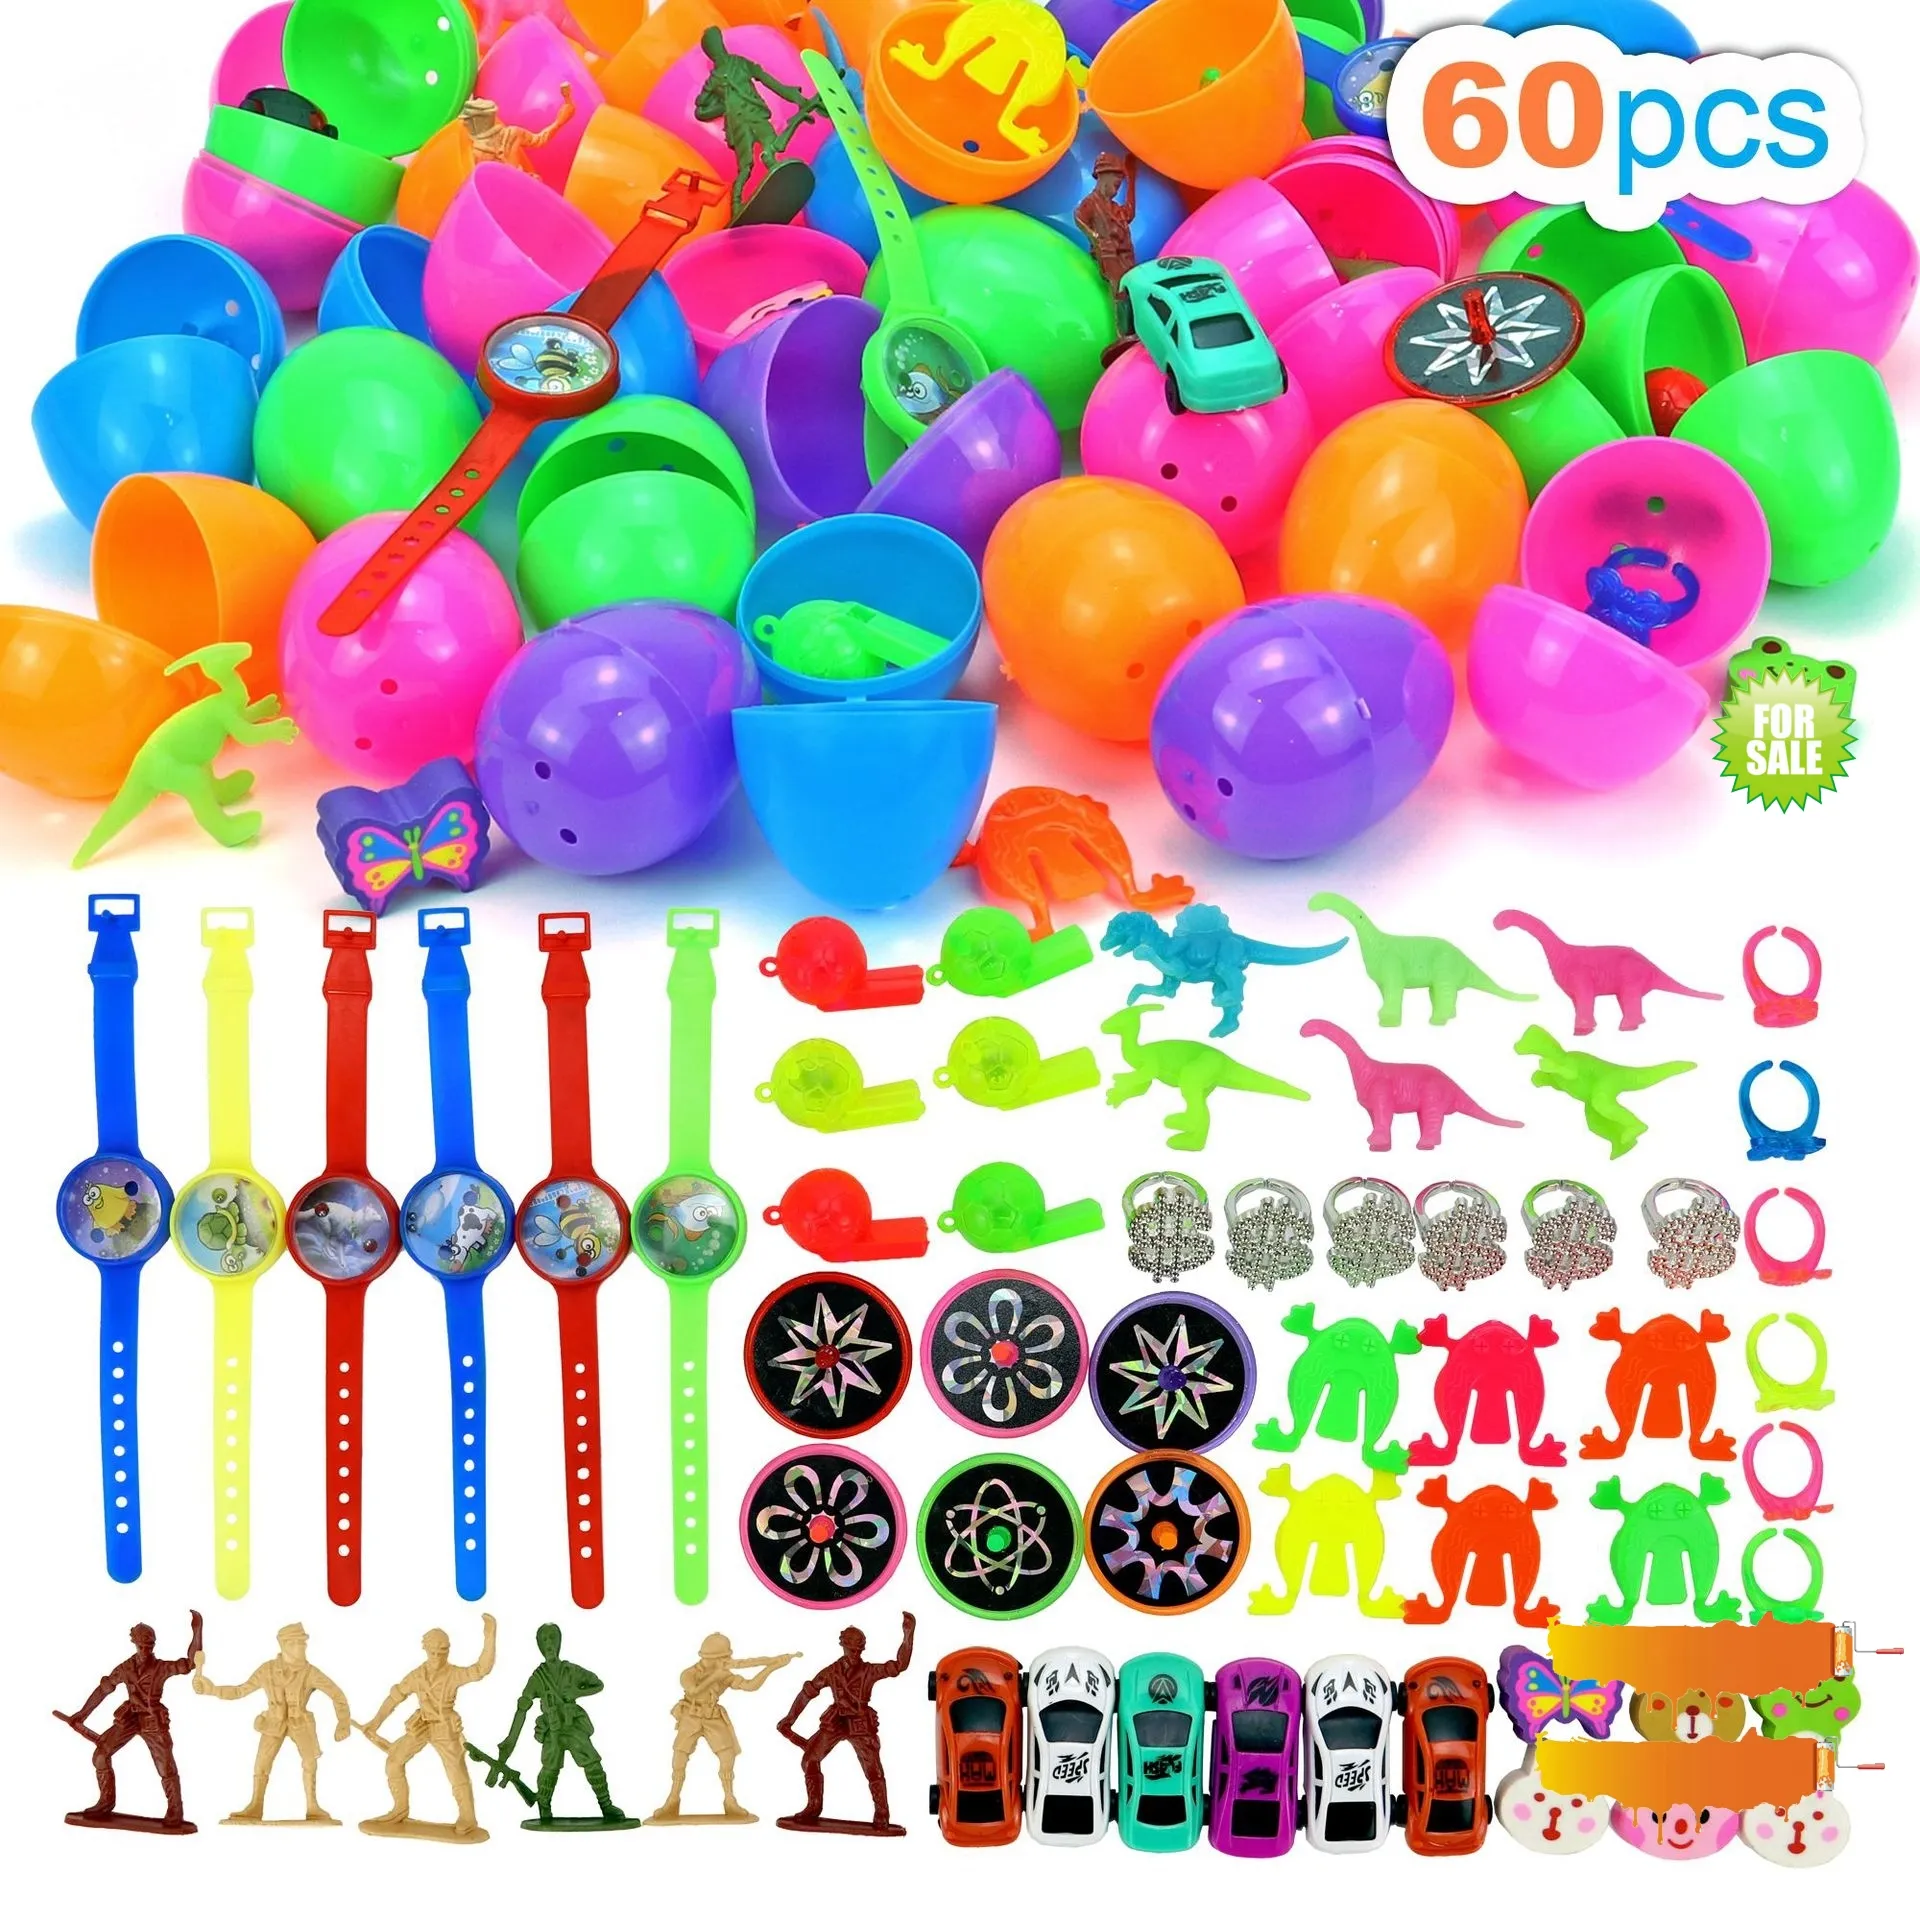 Free Shipping 60pcs Easter Basket Stuffers All in One Easter Eggs with Novelty Toys Fillers Party Favor Prize Supplies